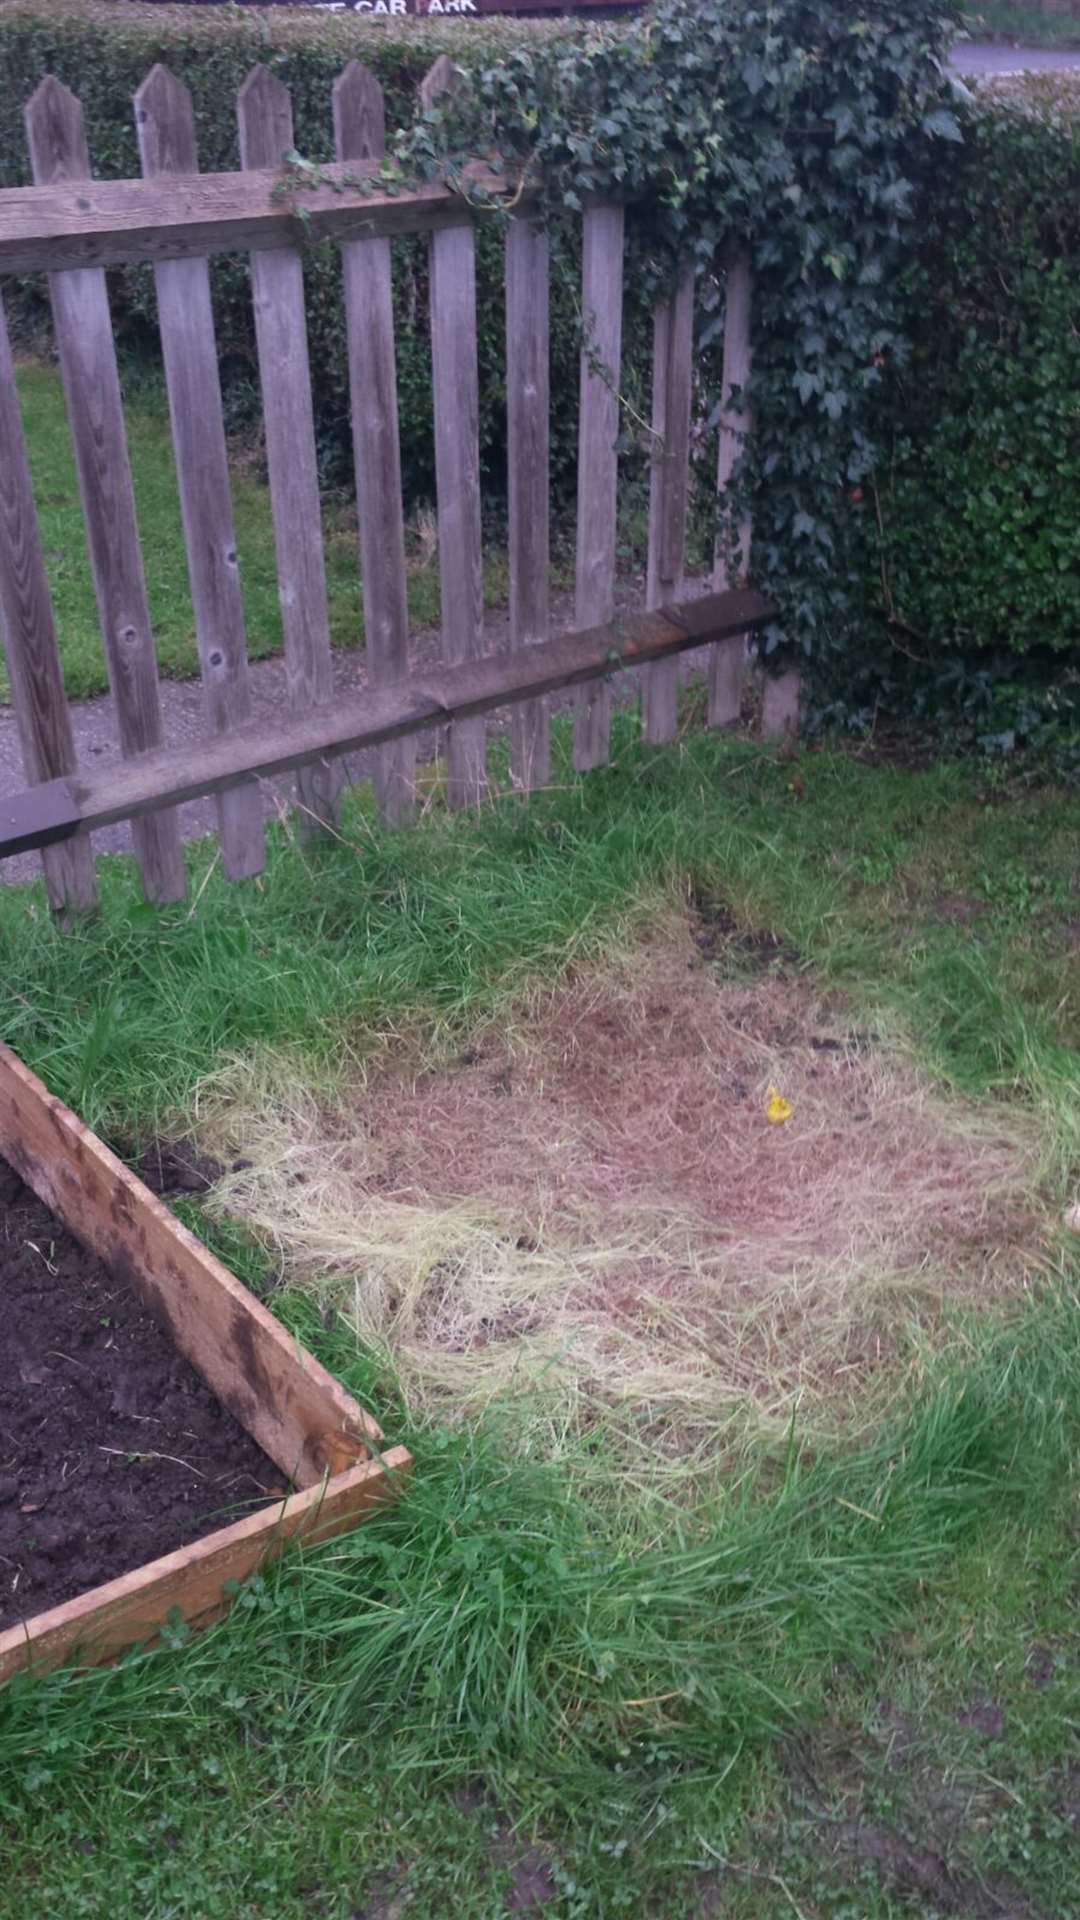 The empty plot where the wendy house stood.